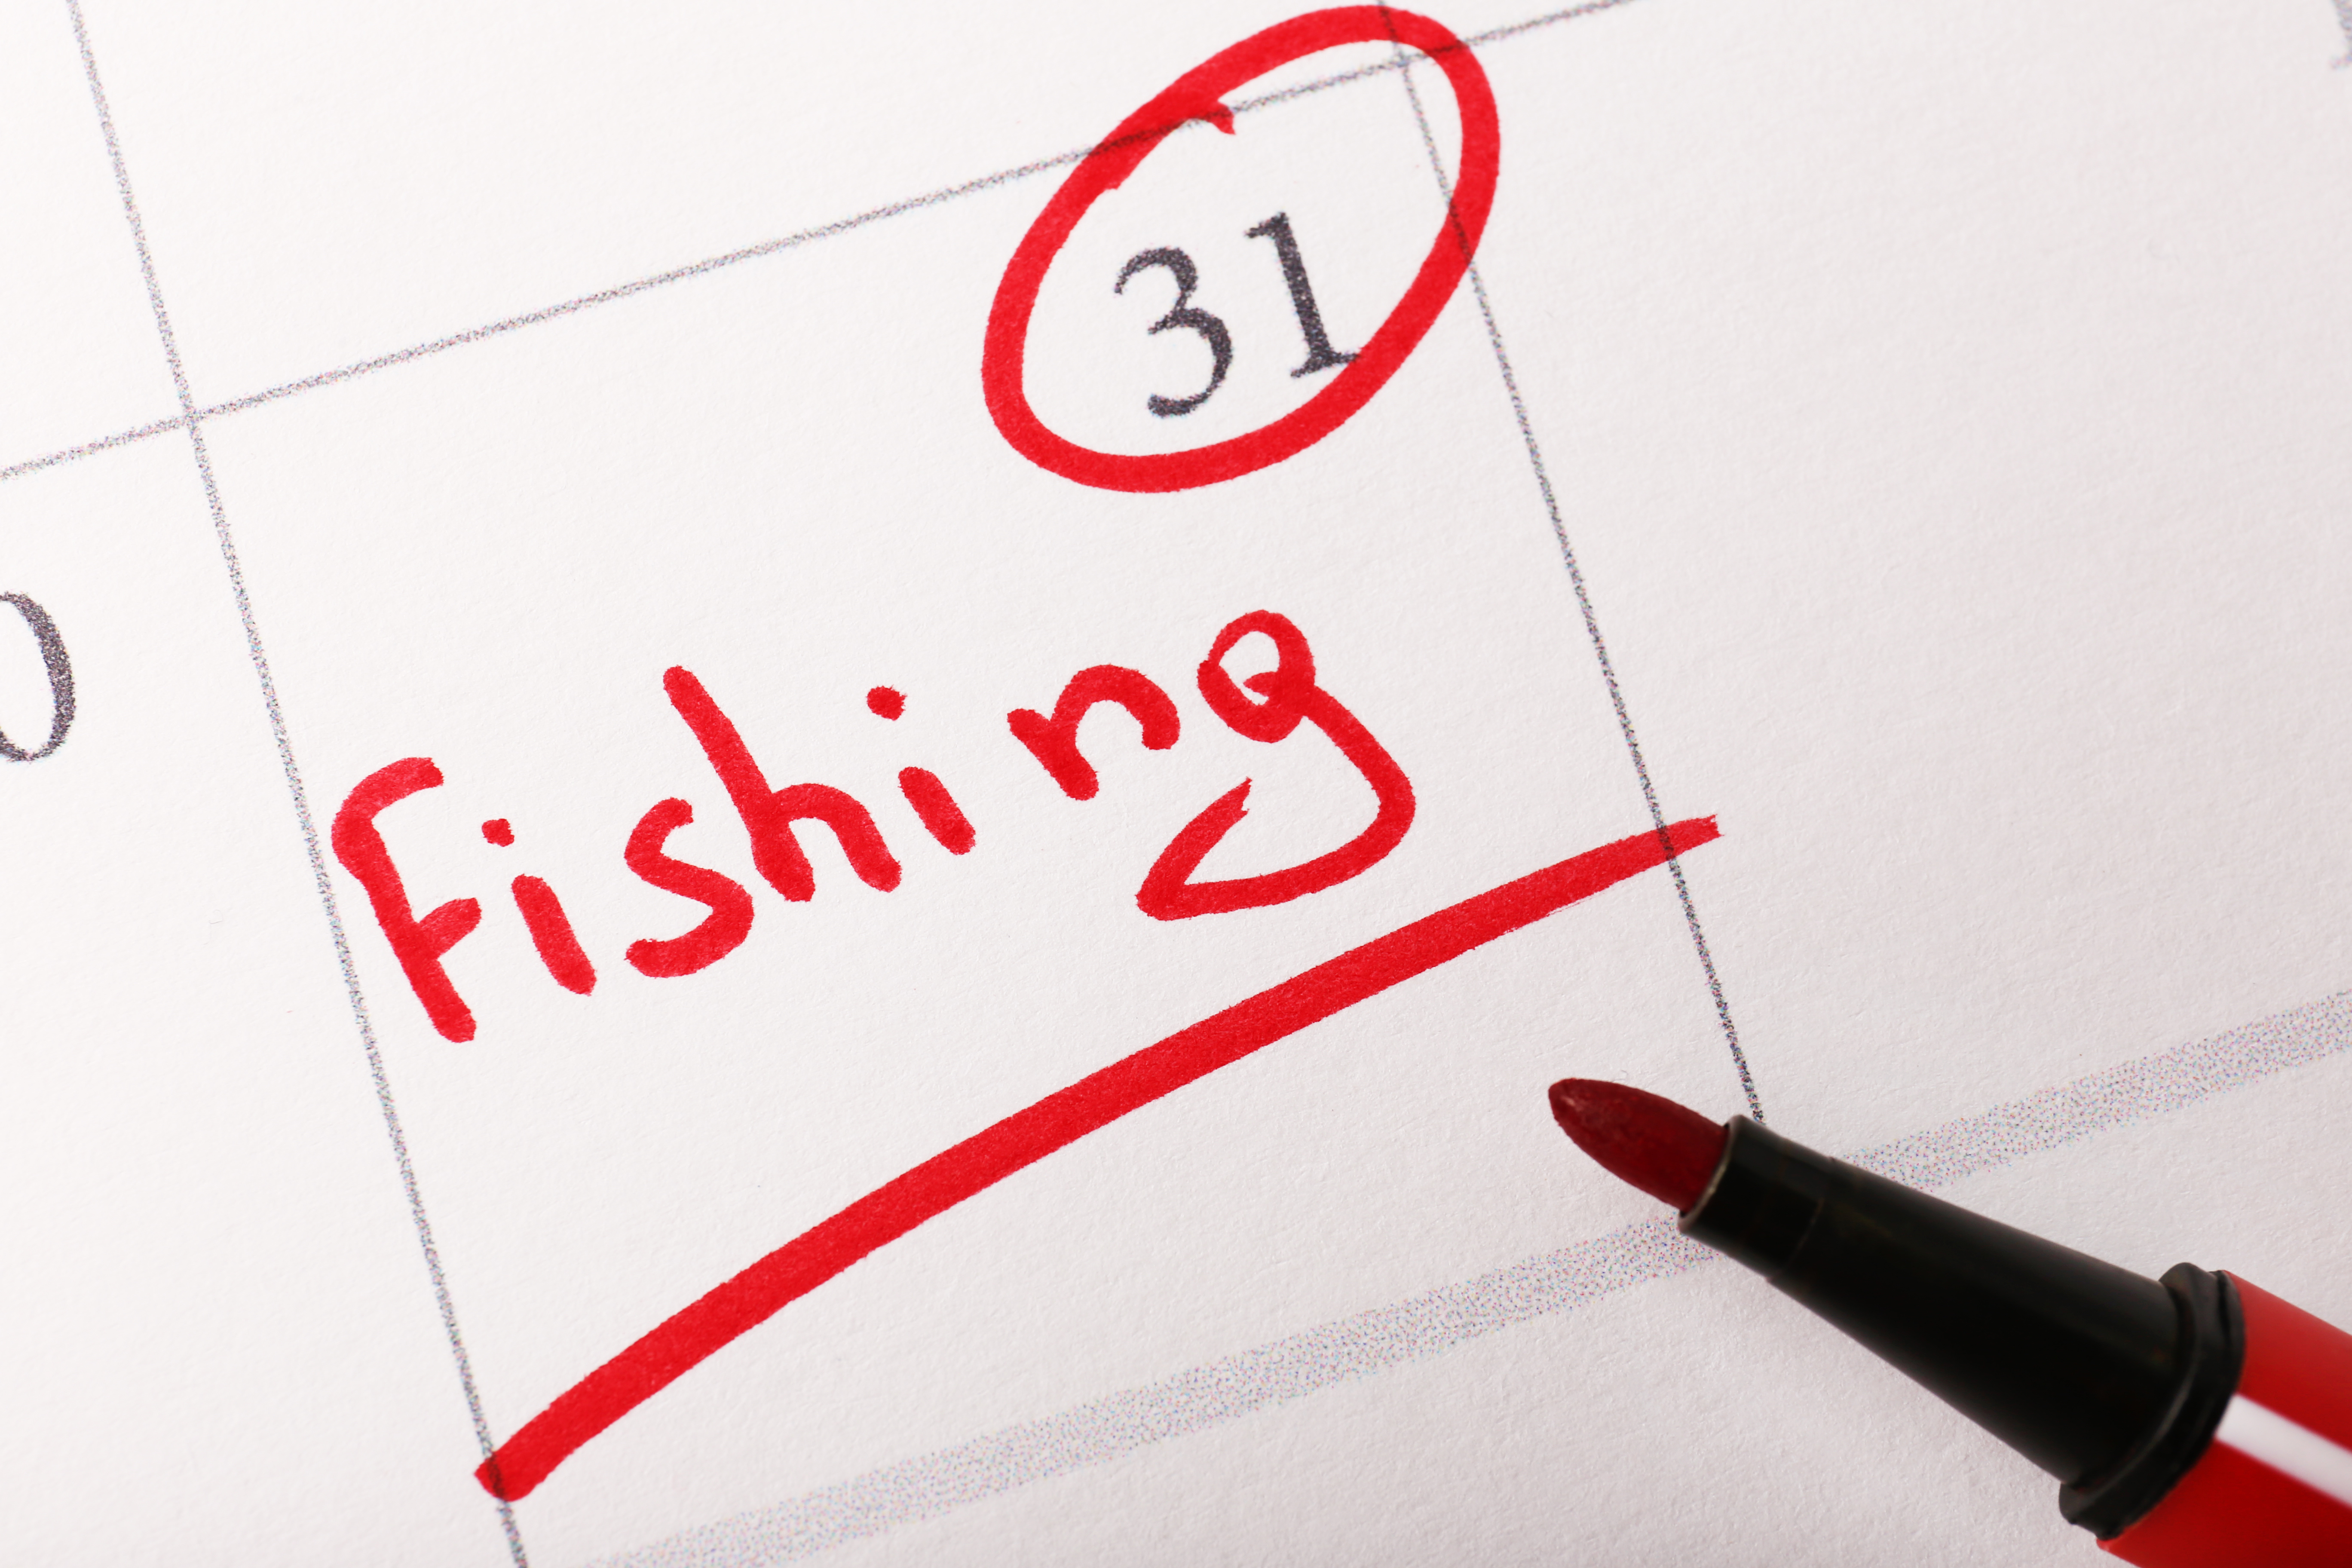 Fishing Calendar - Because Everyday is a Fishing Day